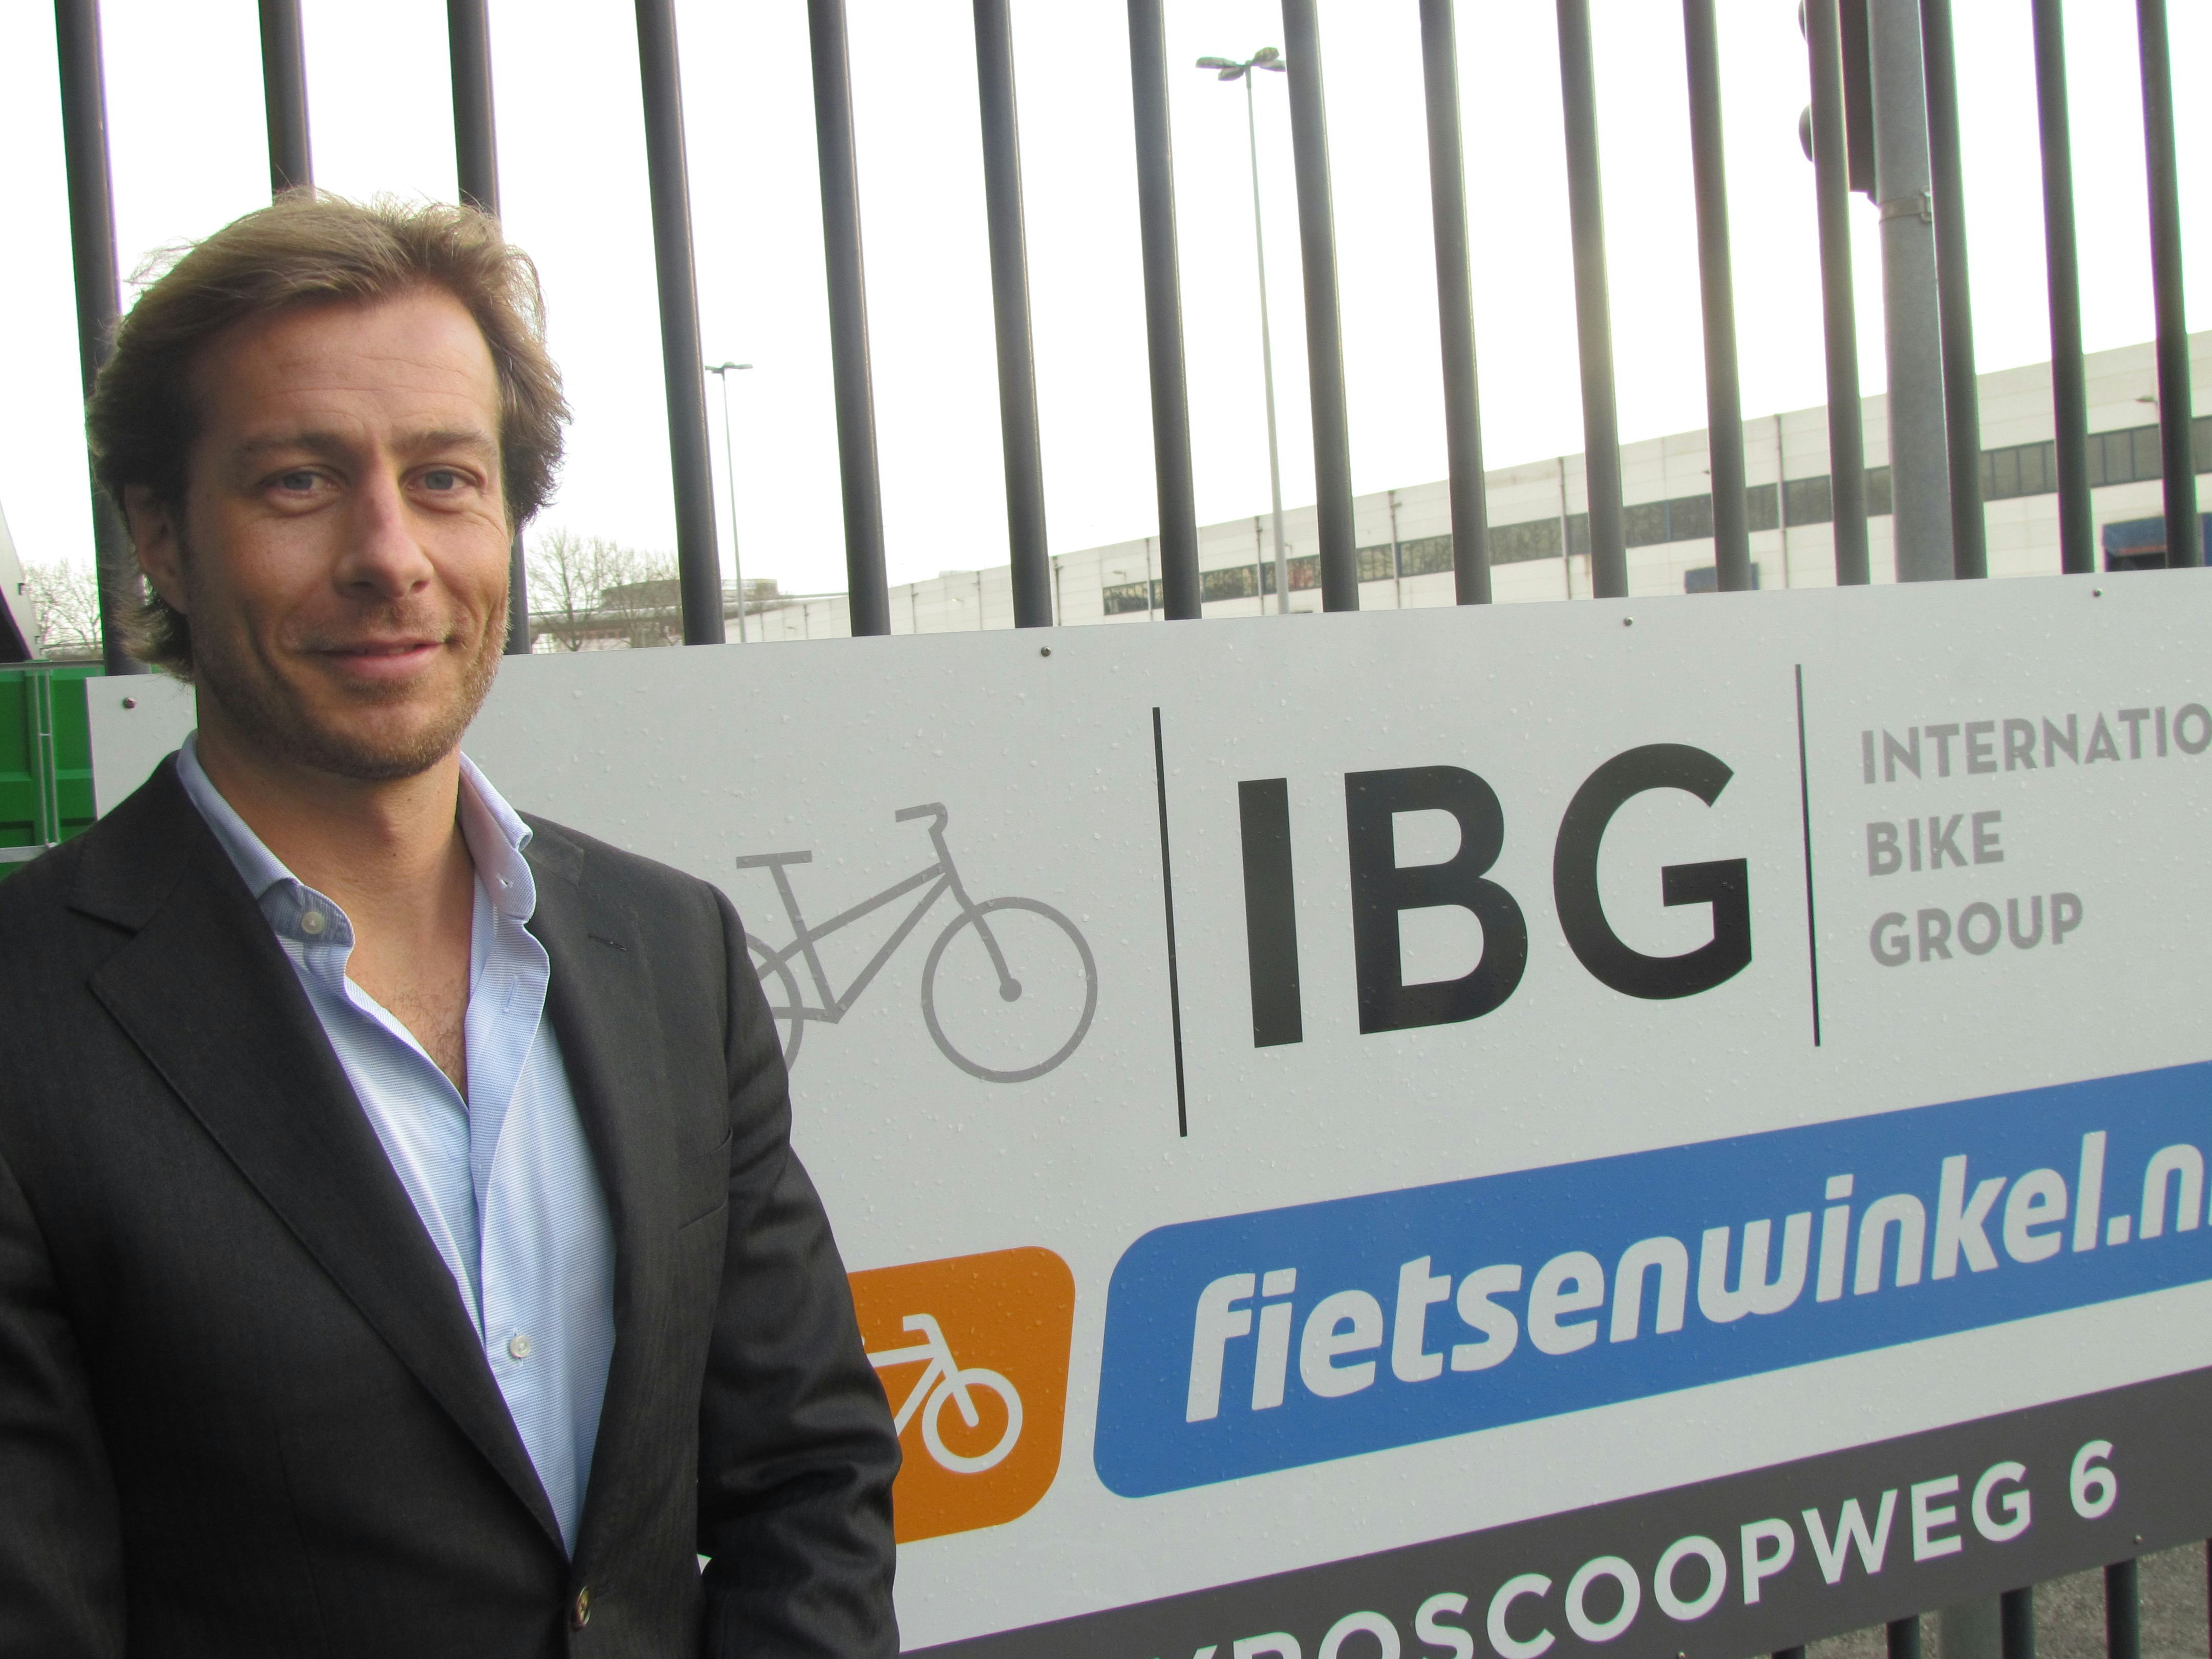 Former McKinsey consultant Bastiaan Hagenouw started six years ago in the bike business. Now, as IBG CEO he sold 15 of the company’s Hans Struijk Bikes stores in the Netherlands. – Photo Bike Europe